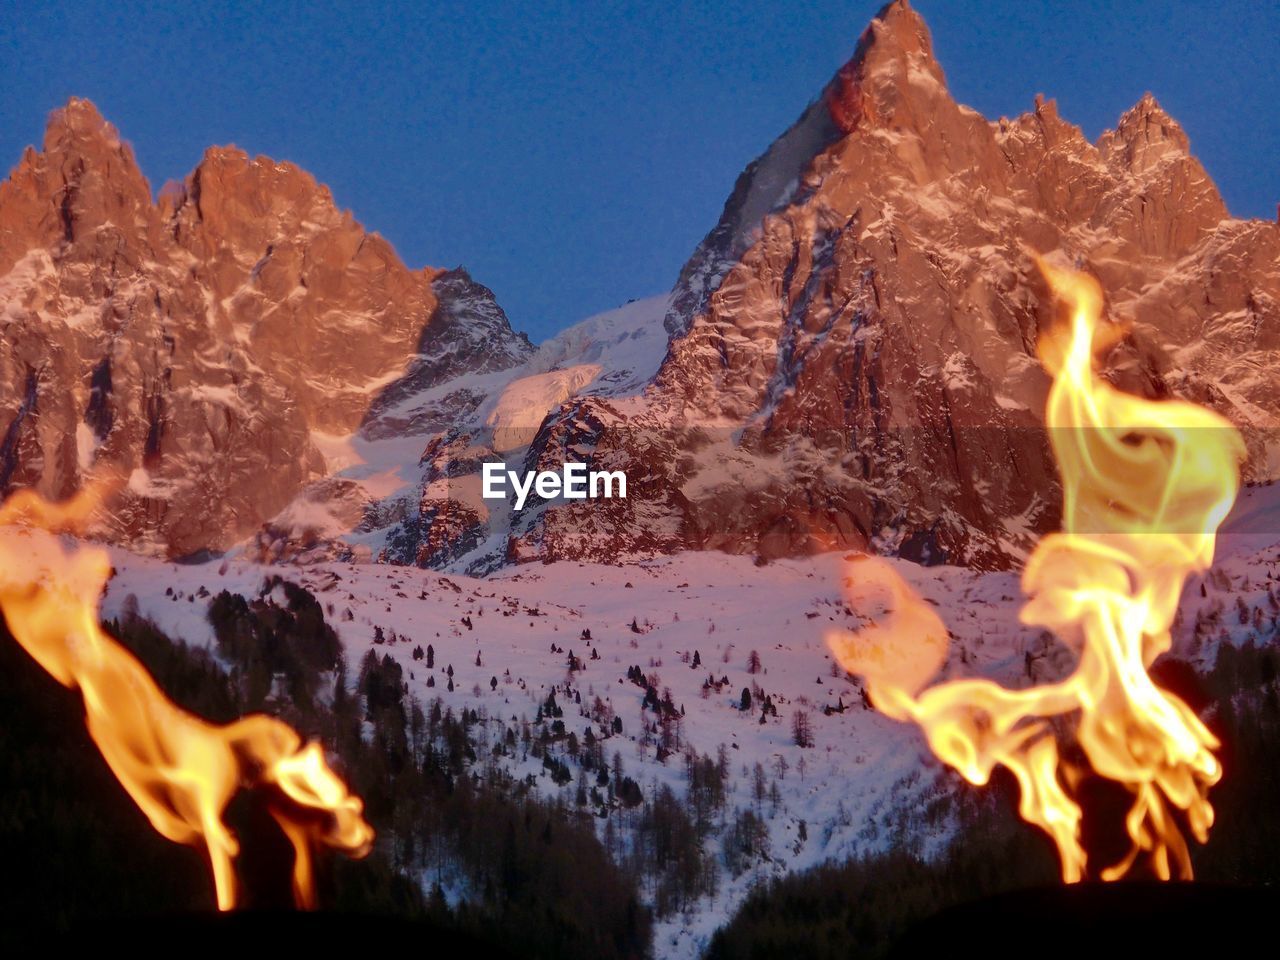 Bonfire on rocky mountain during winter